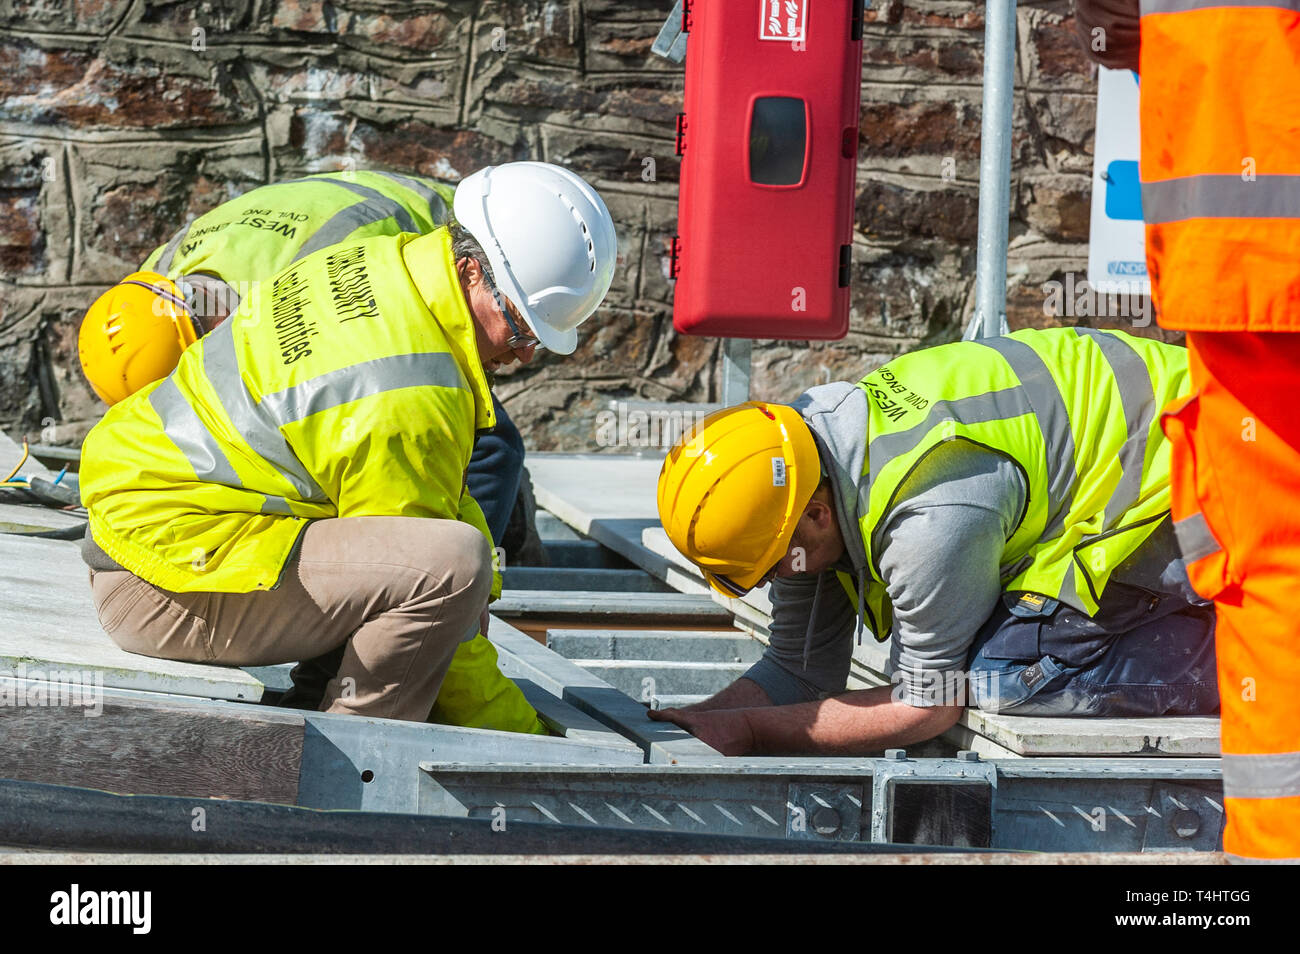 Schull, West Cork, Ireland. 16th Apr, 2019. West Cork Civil Engineering were given the task of refloating the €600,000 Schull pontoon, ready for the season.  Workers are seen preparing a piece of the pontoon onto the slipway, ready to be floated into the water. Credit: Andy Gibson/Alamy Live News. Stock Photo